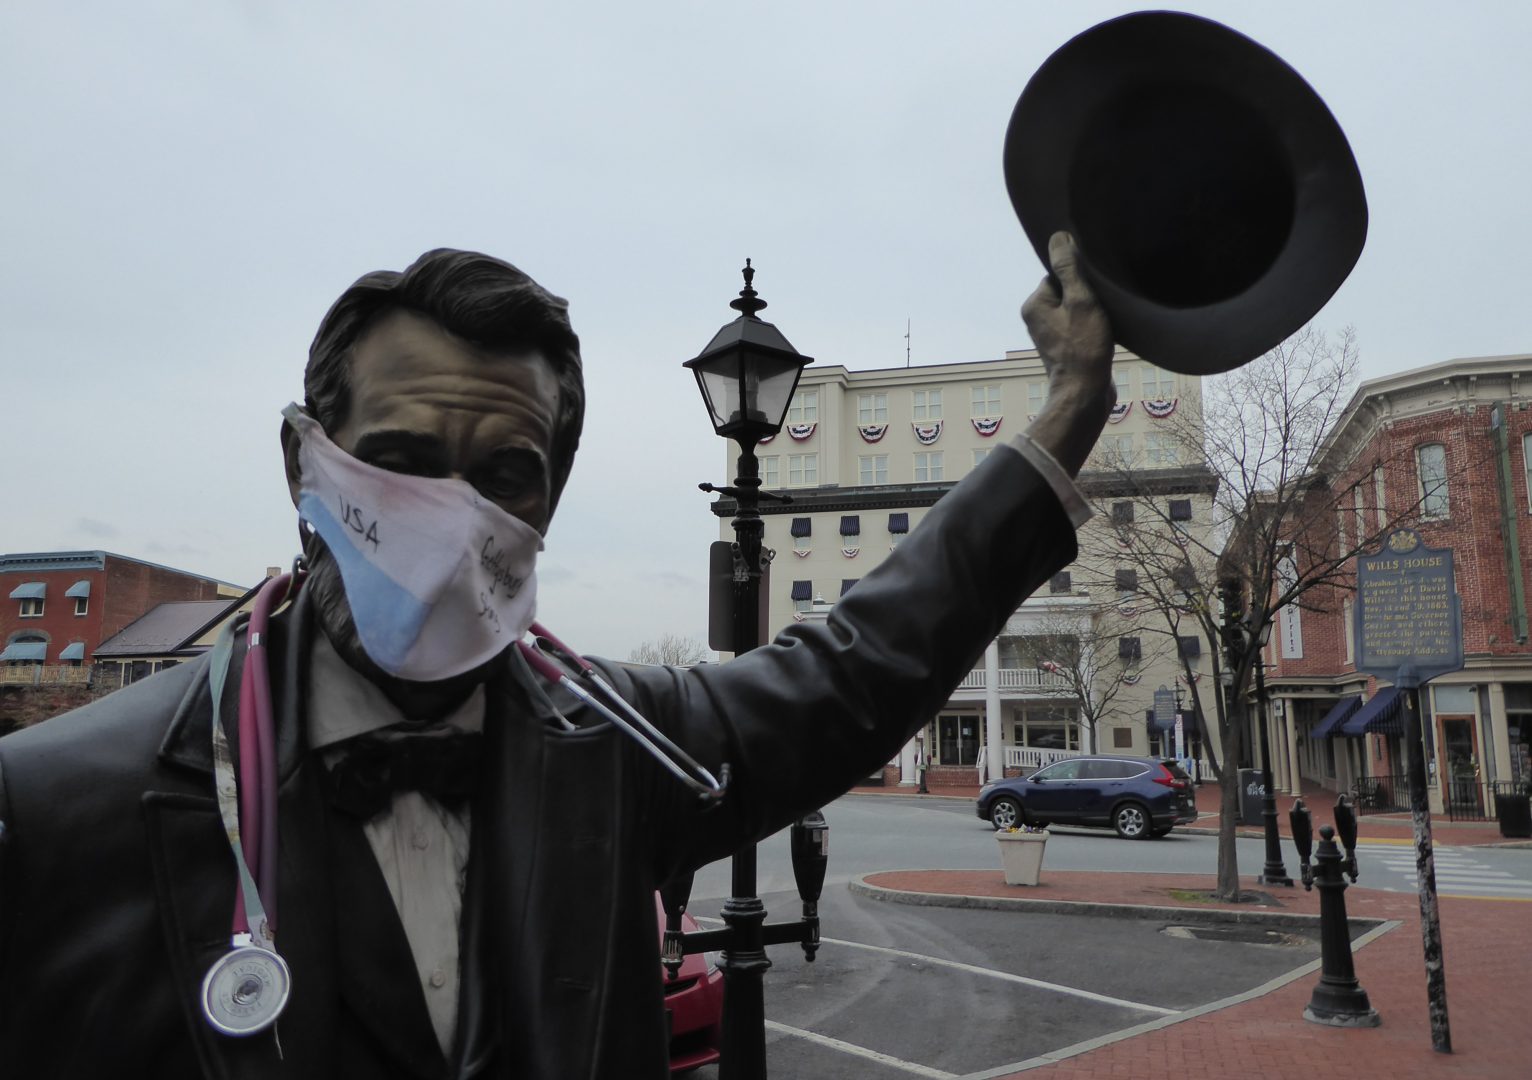 A statue of Abraham Lincoln outside the Wills House in Gettysburg, Pa. sports a sign of the times during the coronavirus pandemic Monday, April 20, 2020. Gov. Tom Wolf recommended that all Pennsylvanians wear masks when they go out.